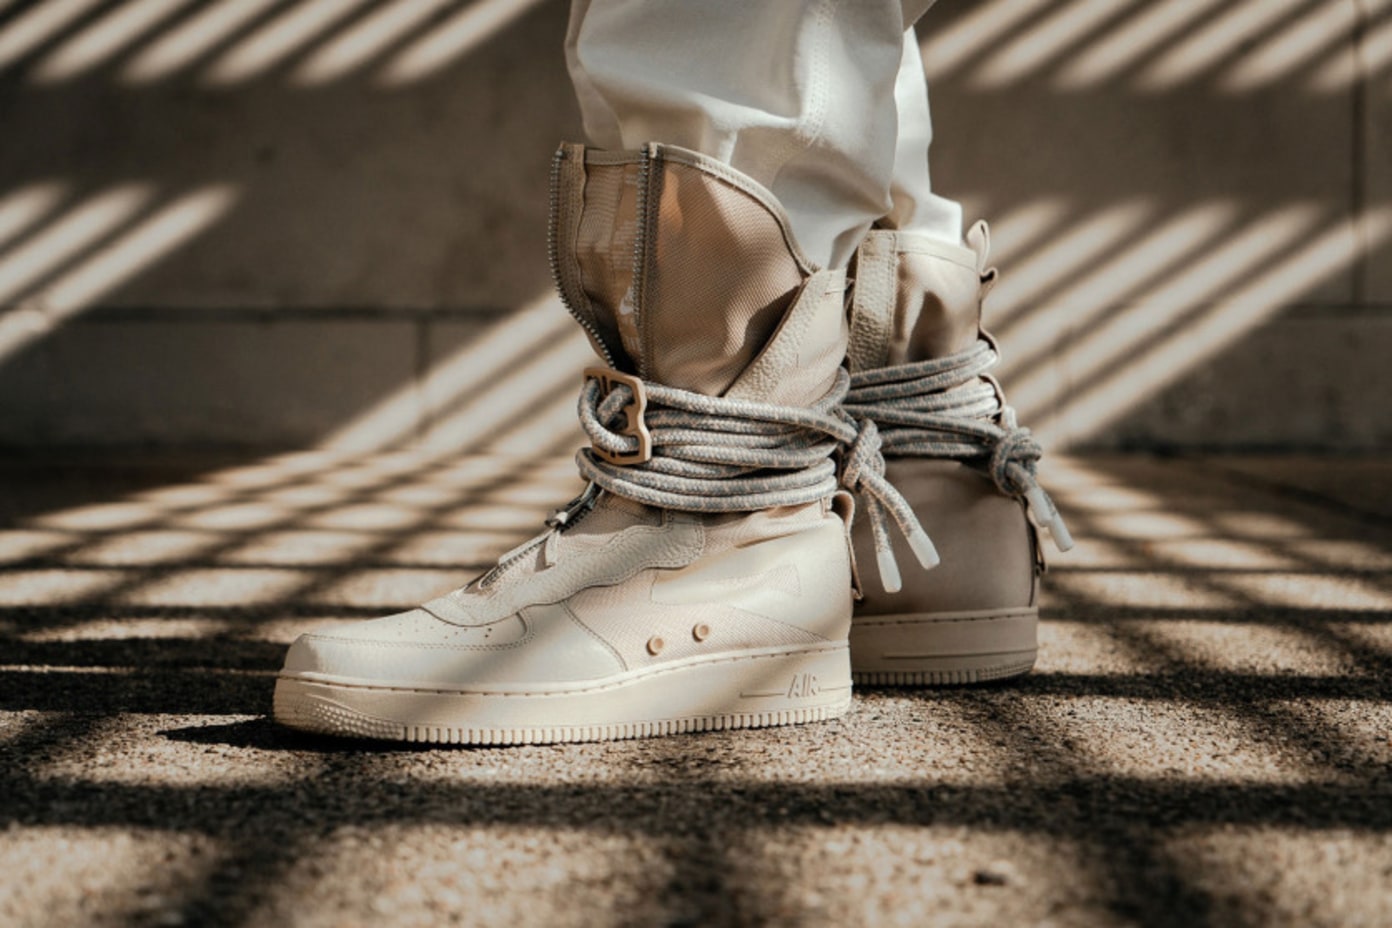 Nike Special Field Air Force 1 High Shelflife